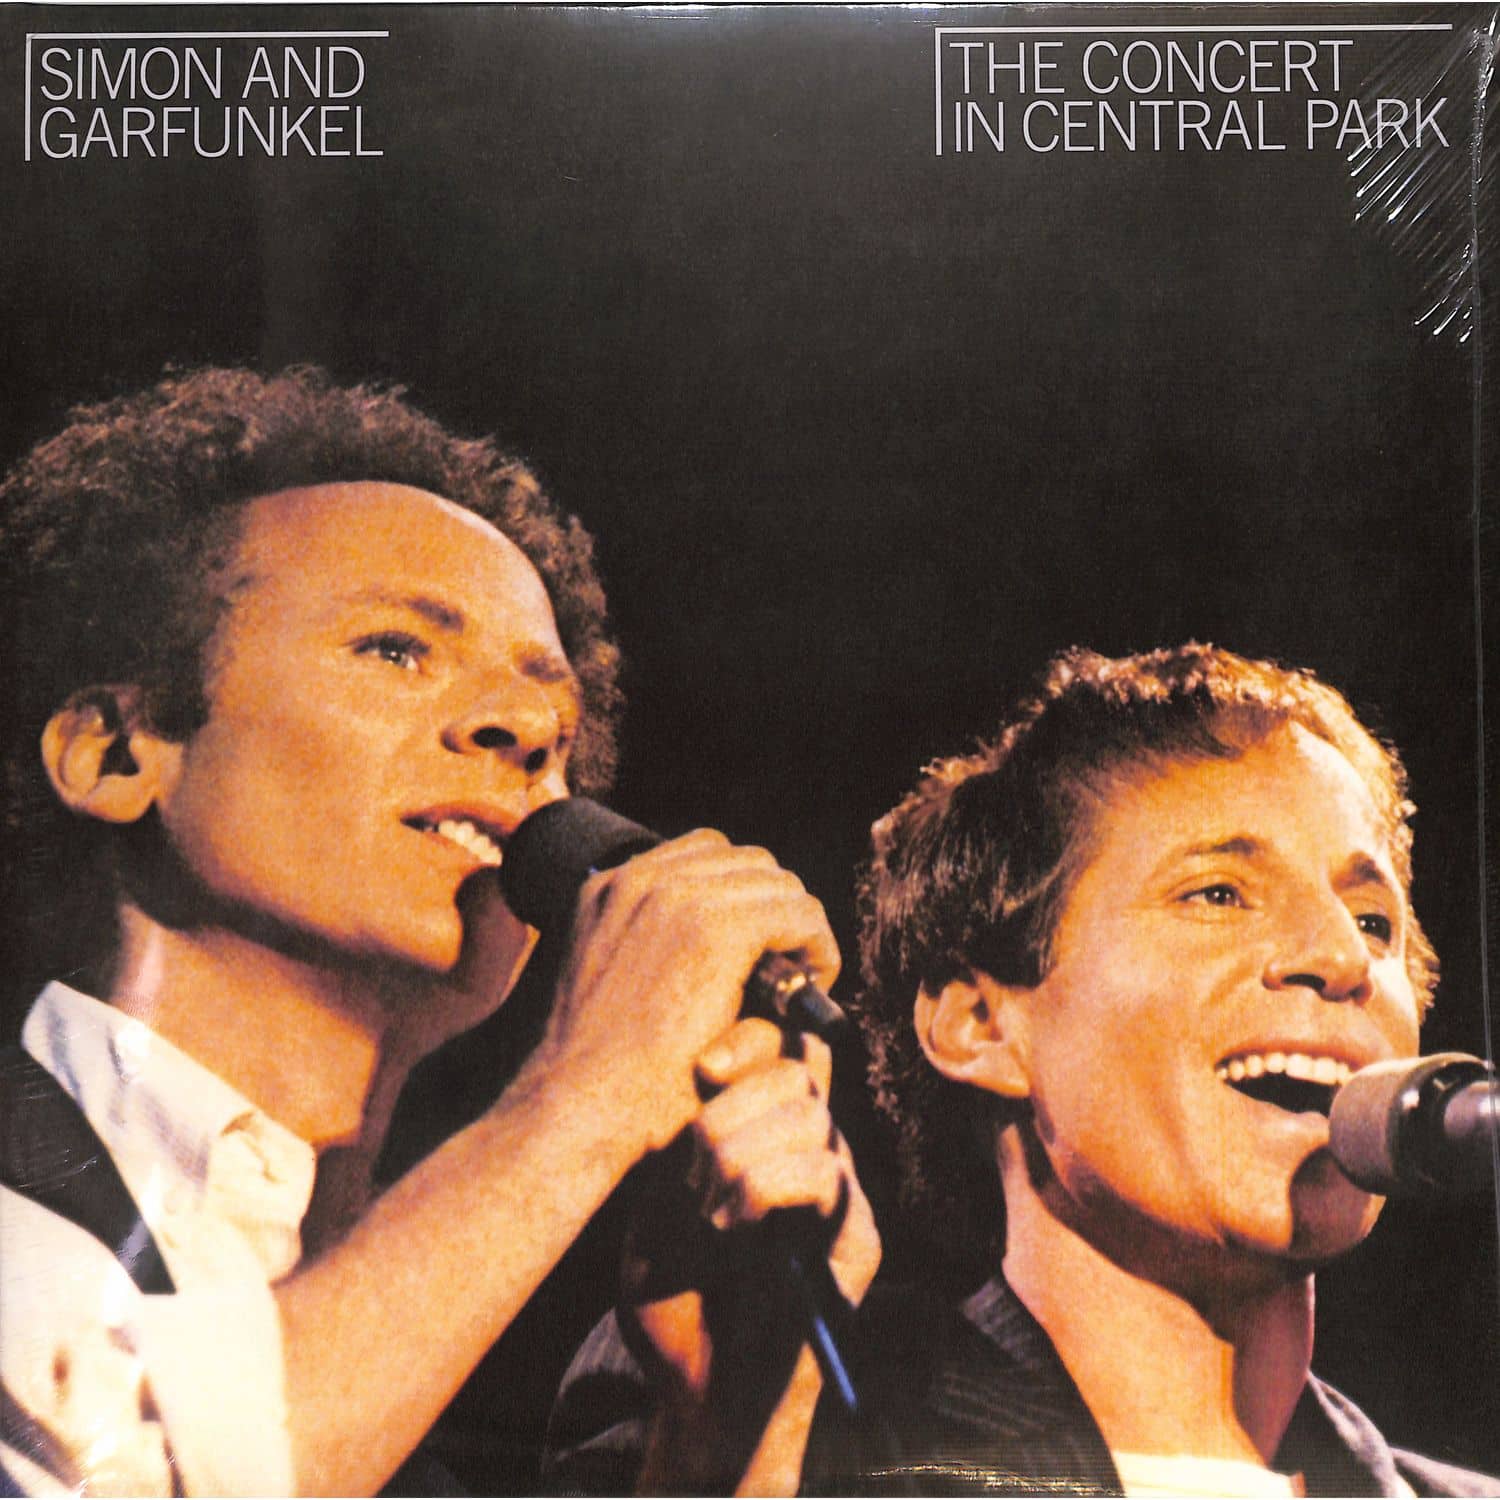 Simon and Garfunkel - THE CONCERT IN CENTRAL PARK 